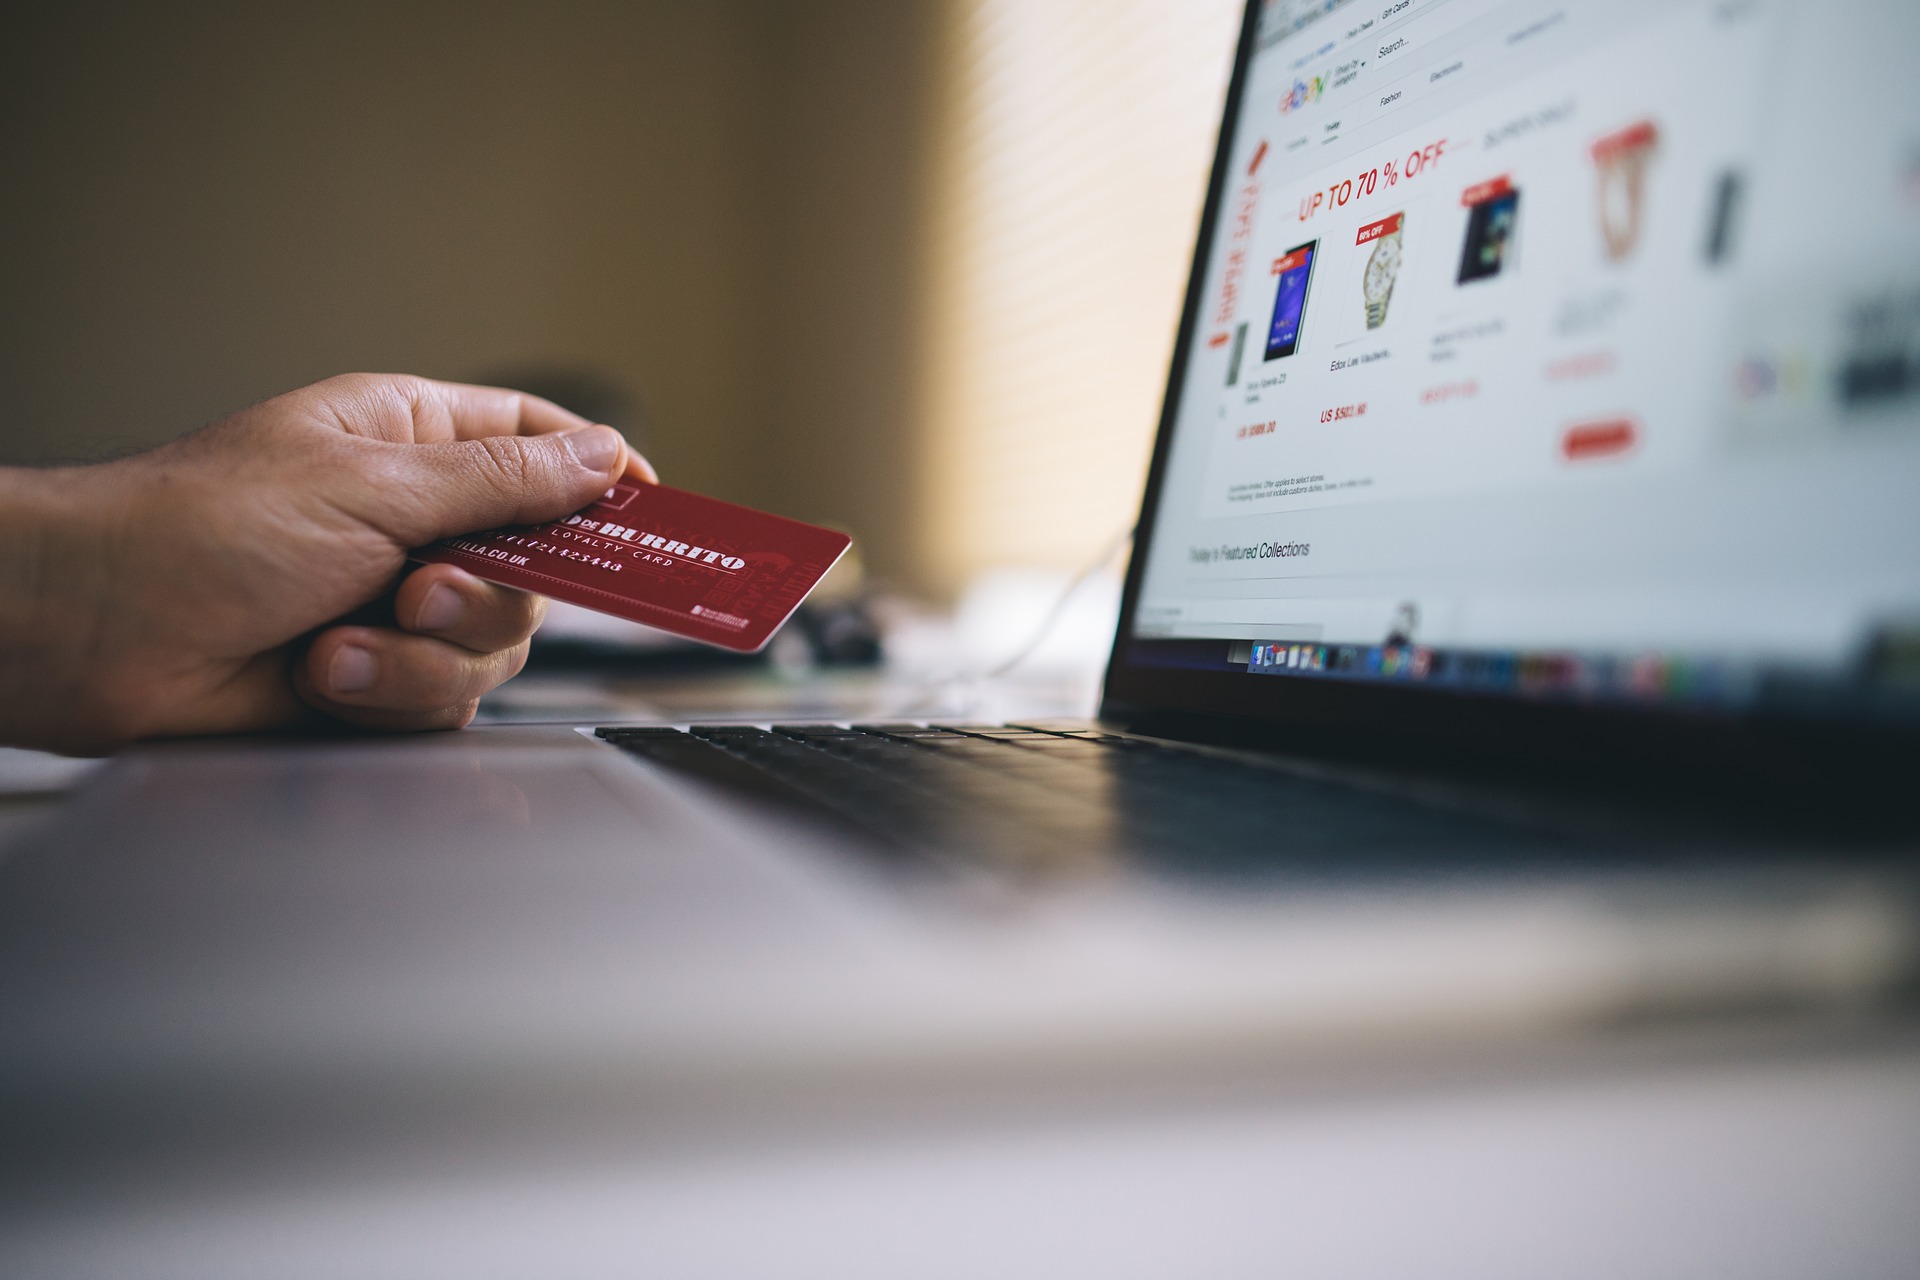 Top E-commerce Trends that will shape online shopping experience in 2022